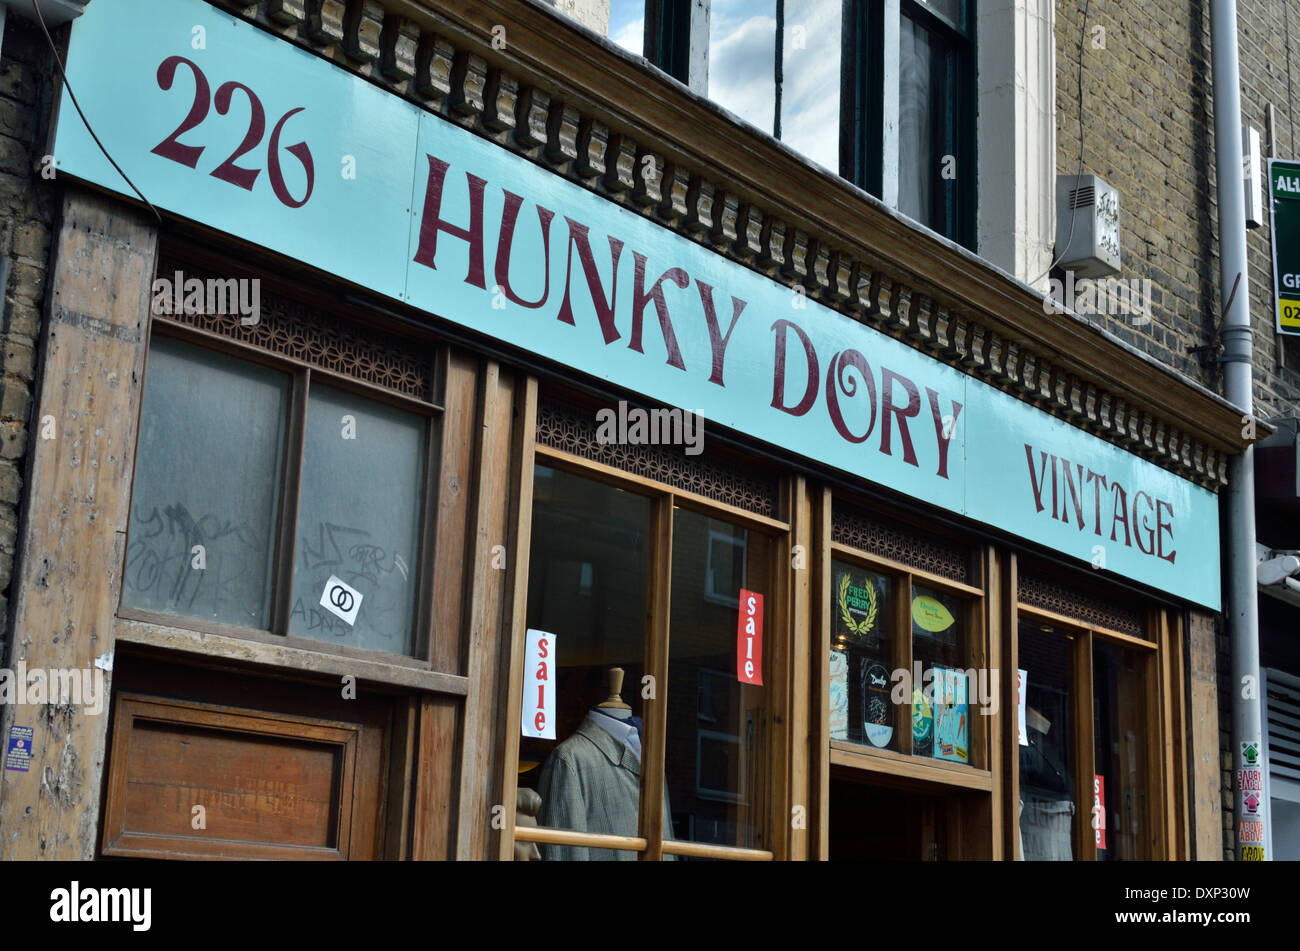 Hunky Dory Vintage Kleidung Shop in Bacon Street, Shoreditch, London, UK. Stockfoto